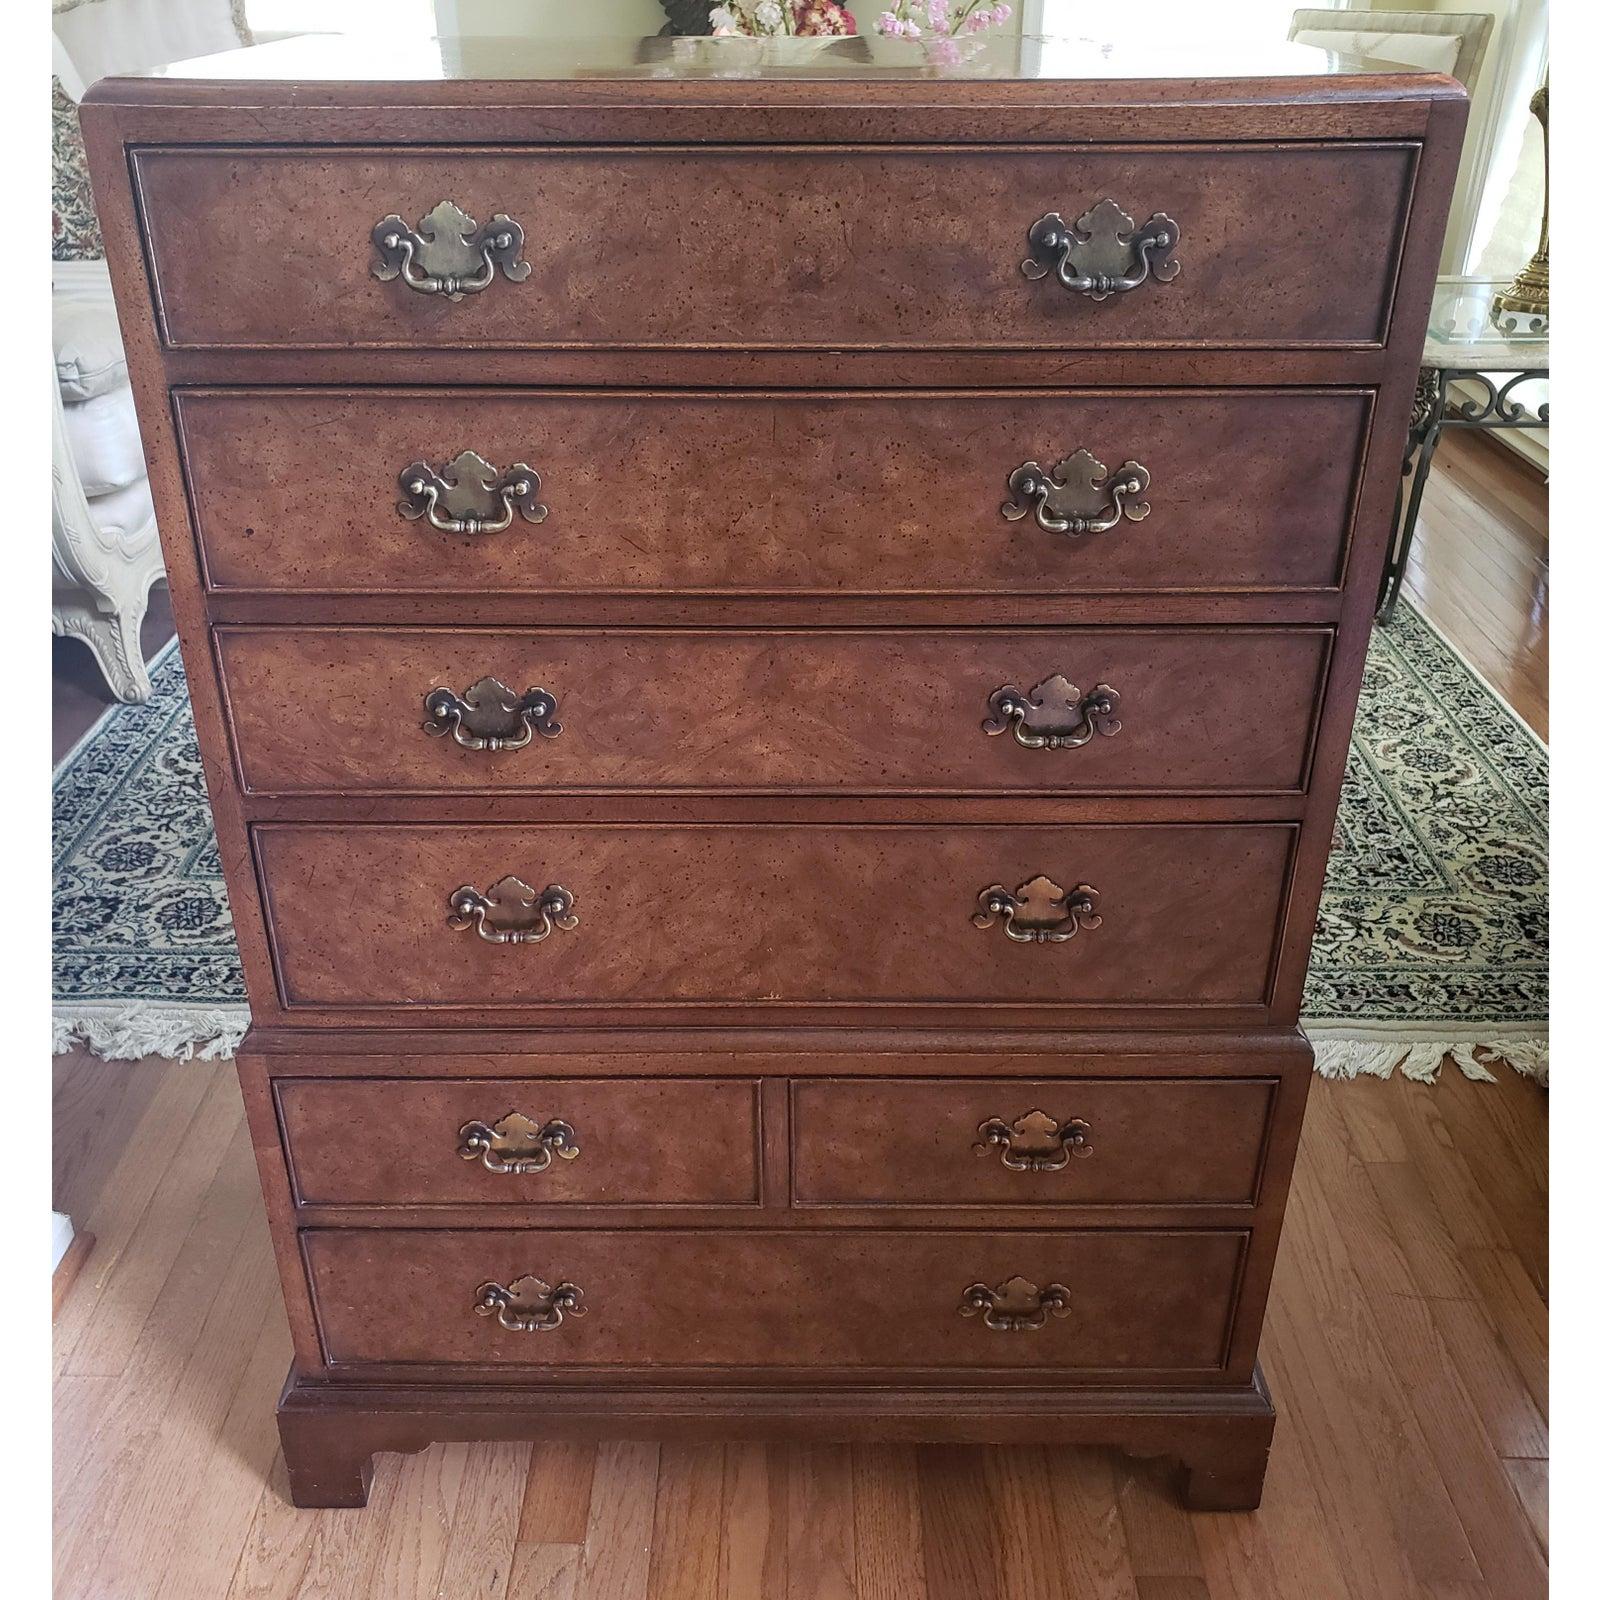 1950s National Mount Airy Chest 9ft drawers in excellent vintage condition. Dovetail drawers work as originally intented. Original hardware. Measures 30